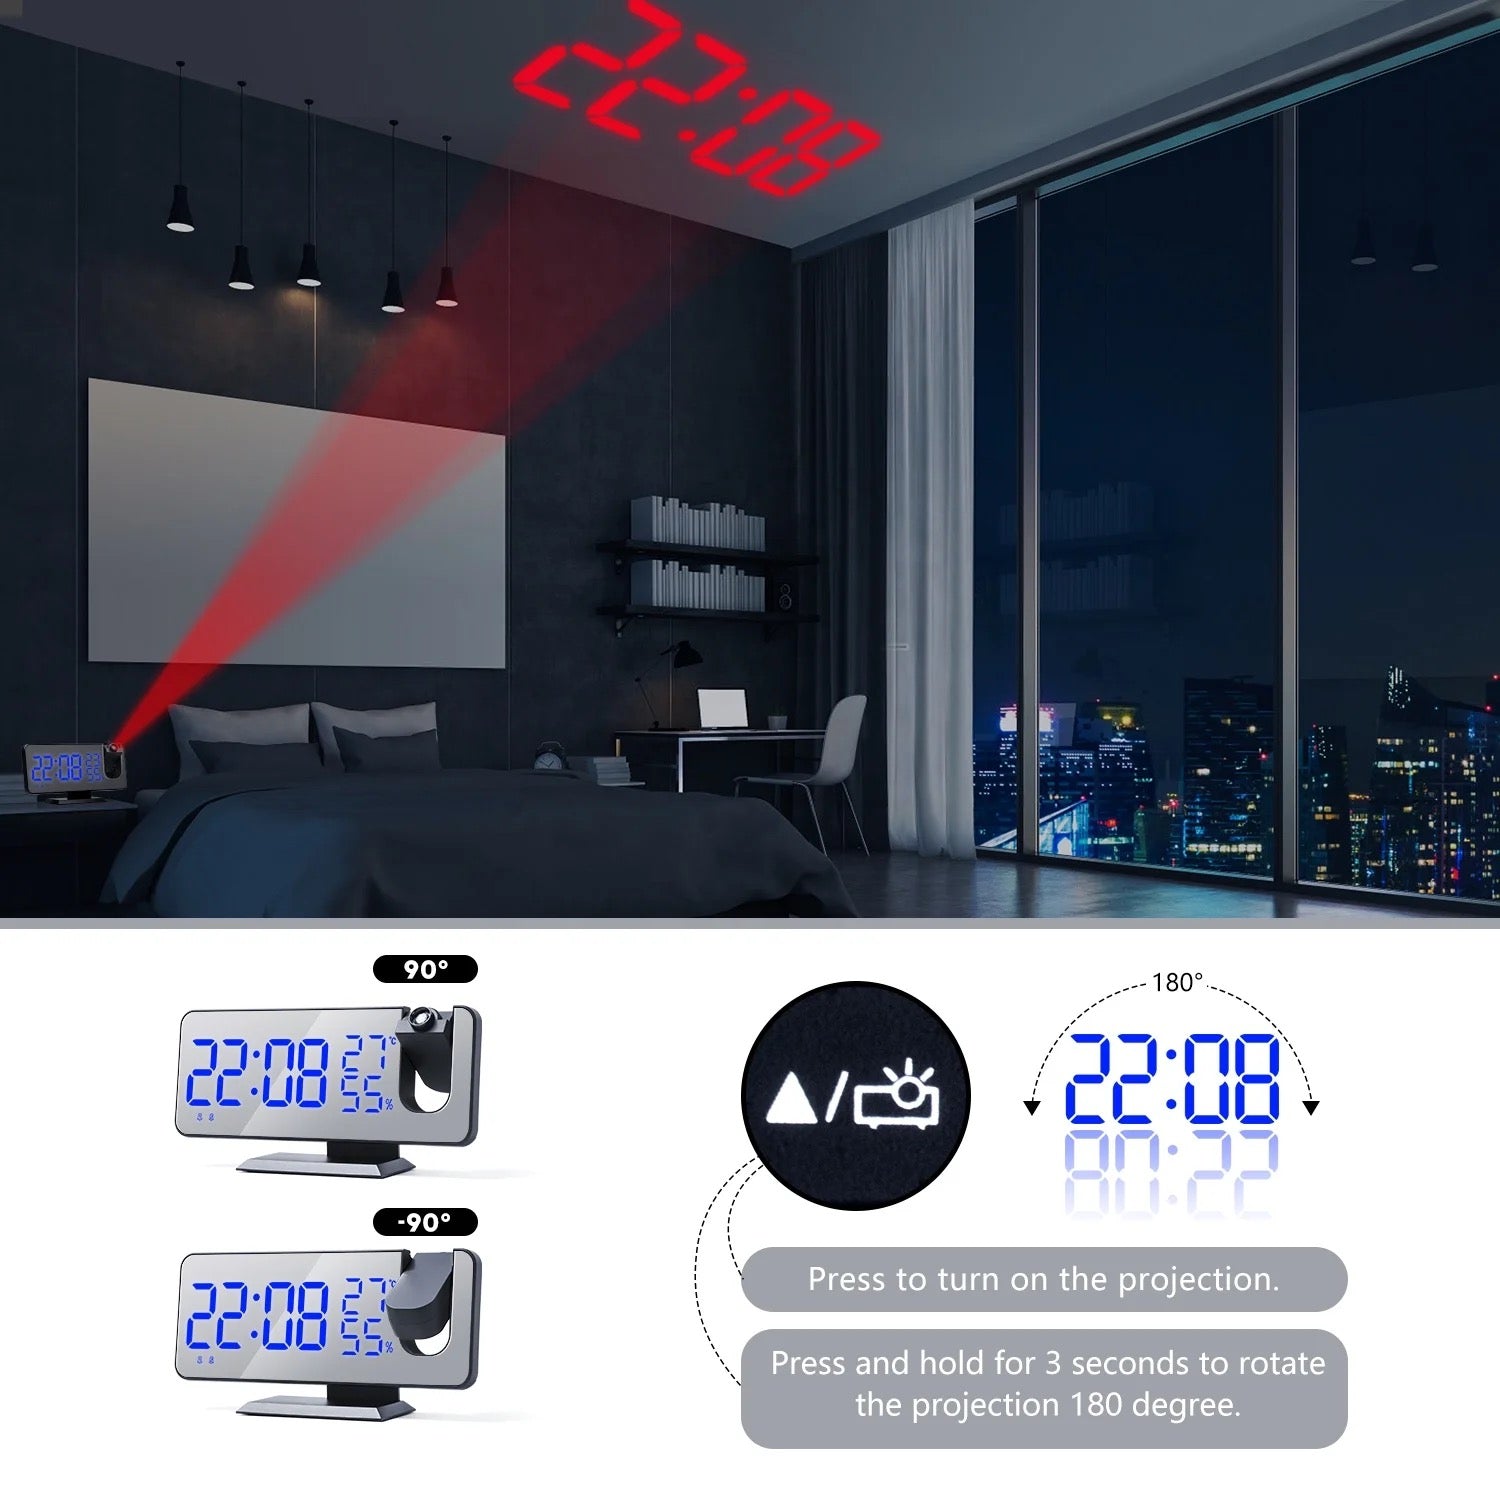 LED Projection Alarm Clock kept in a bedroom showing the projector feature 